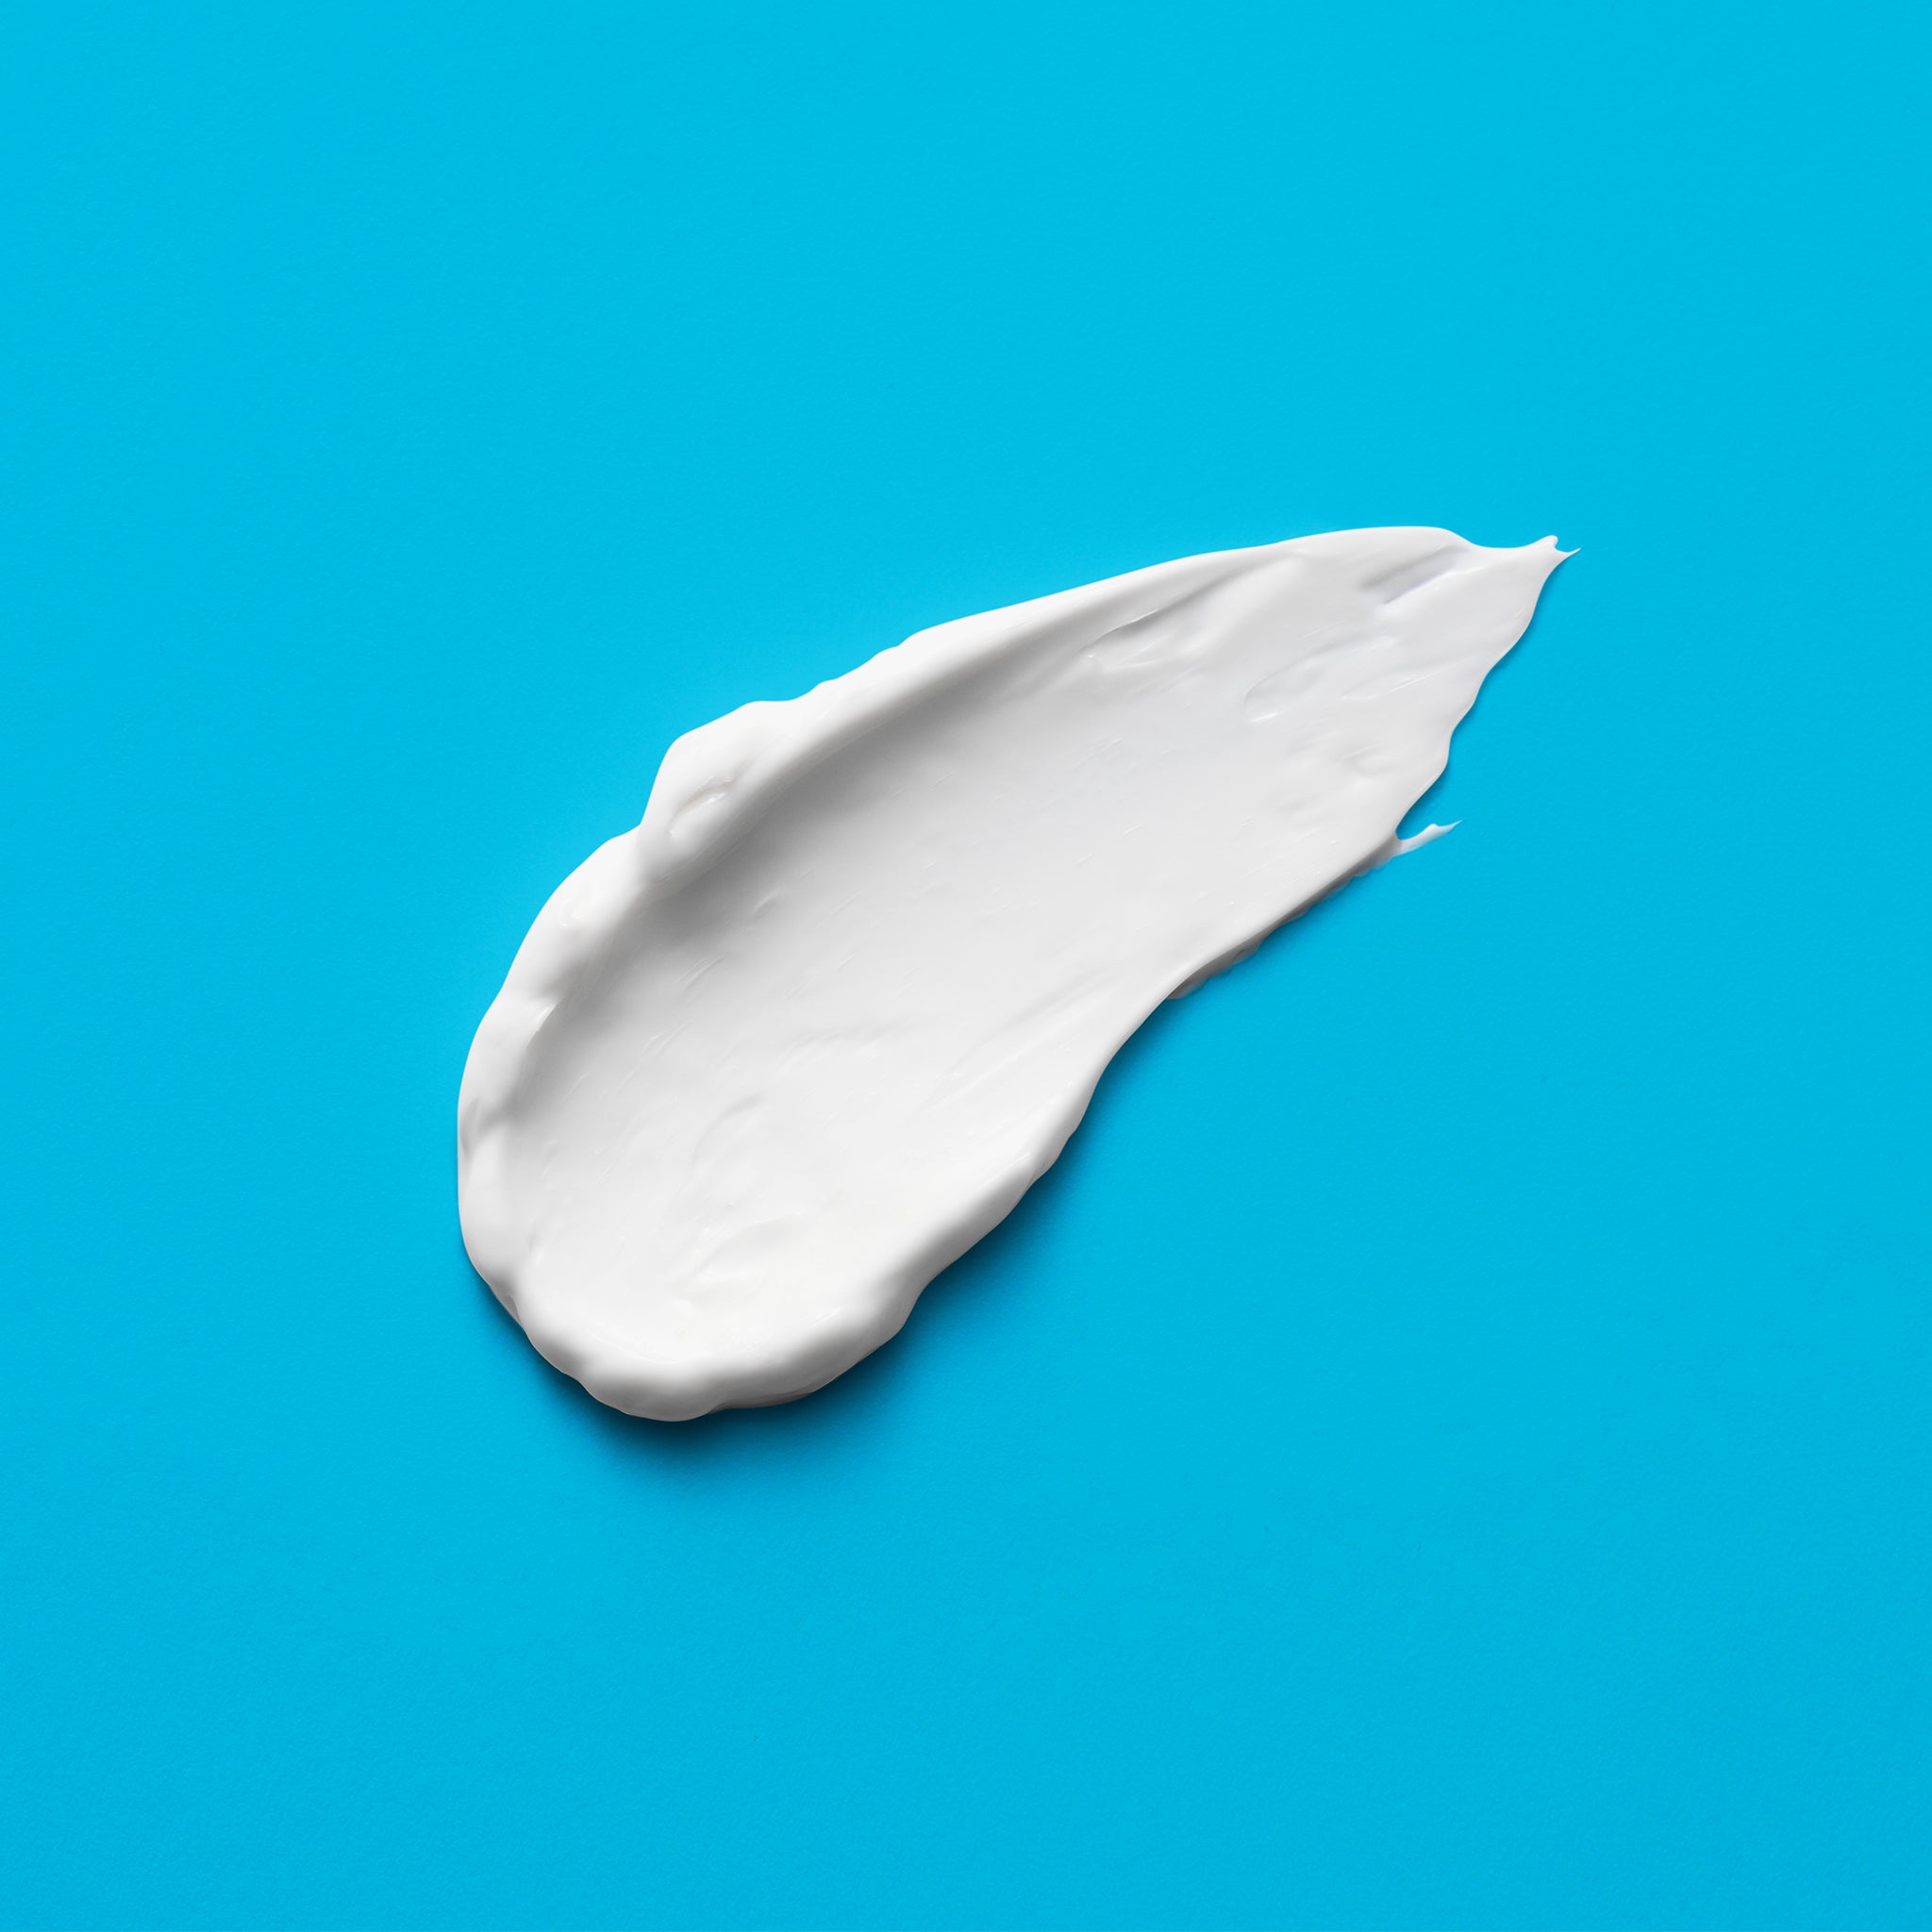 A smear of bright white cream on a light blue background